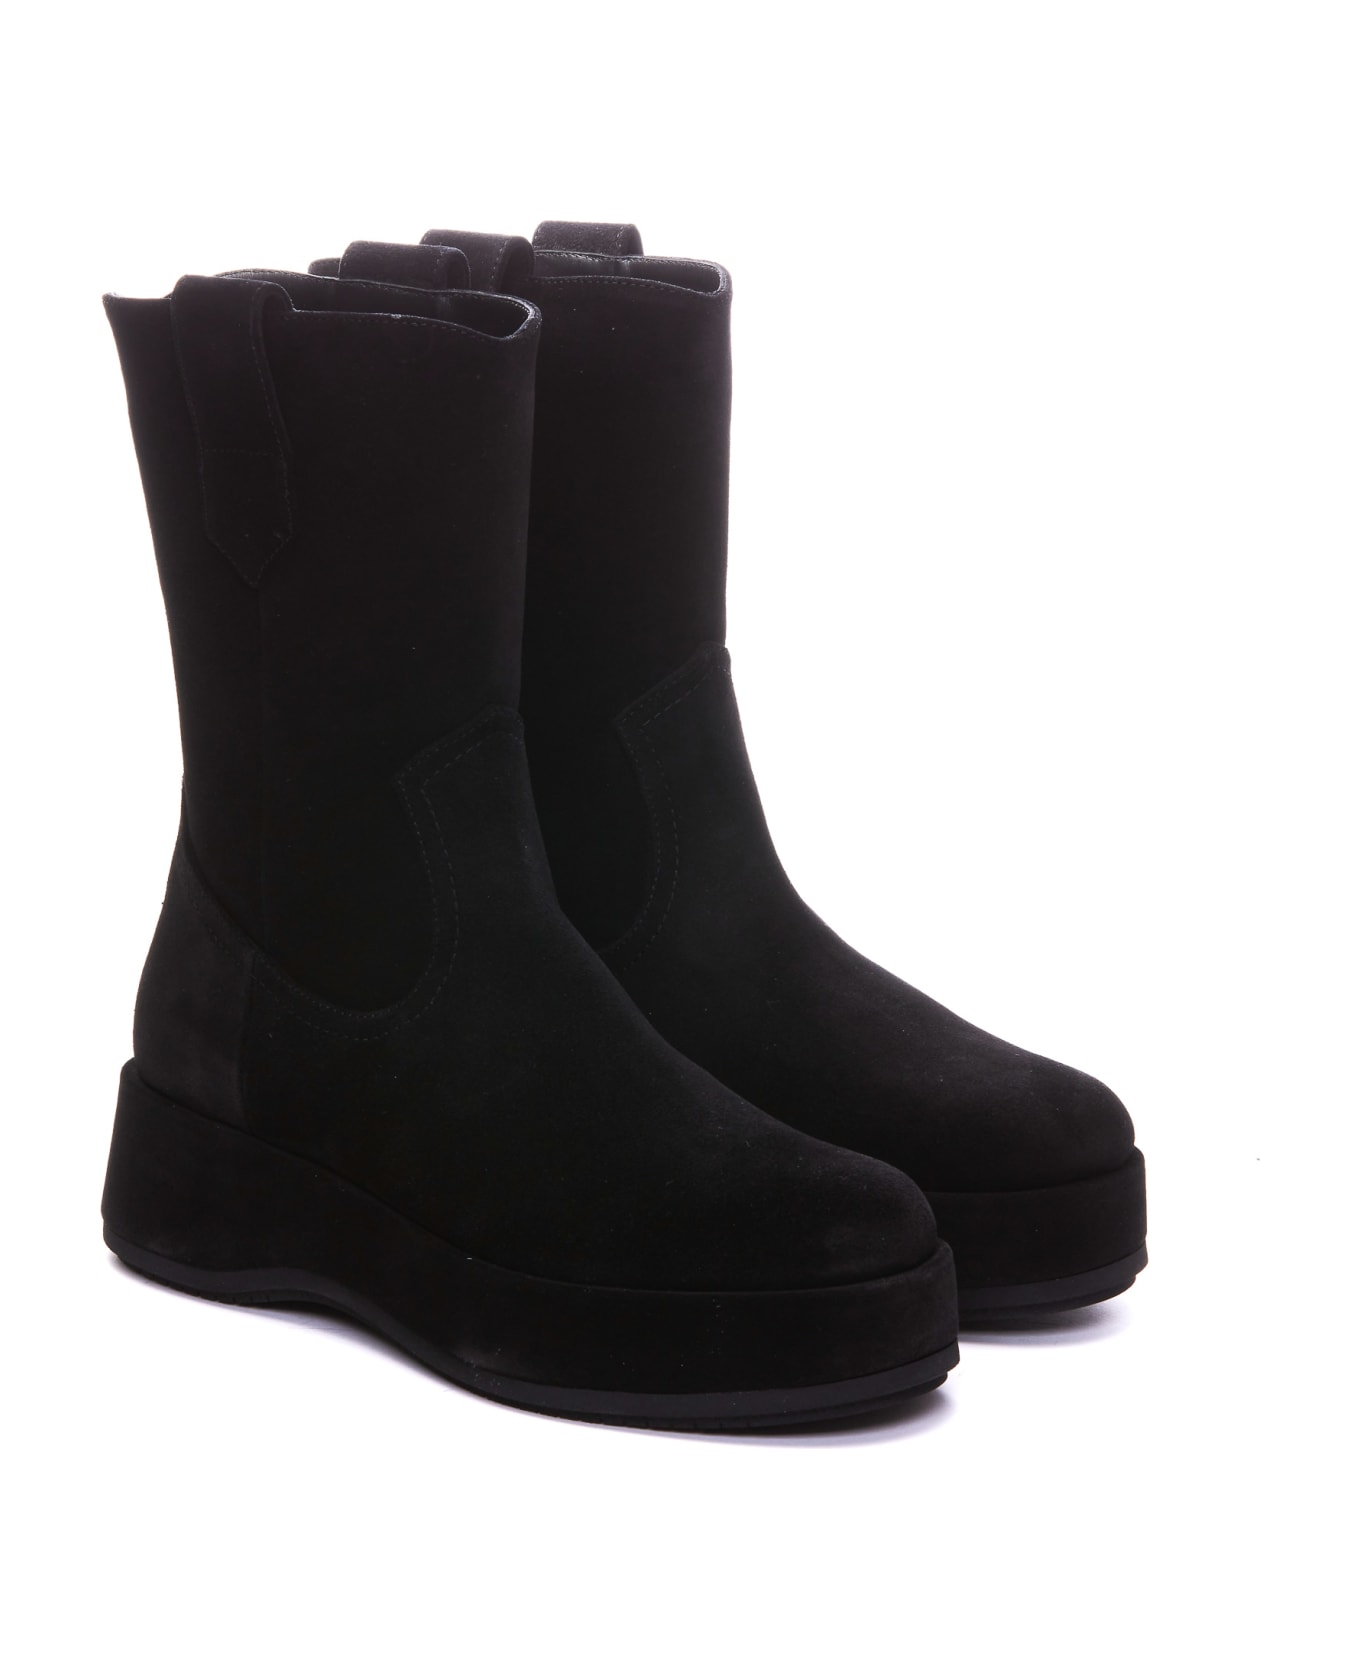 Paloma Barceló Ander Booties - Black